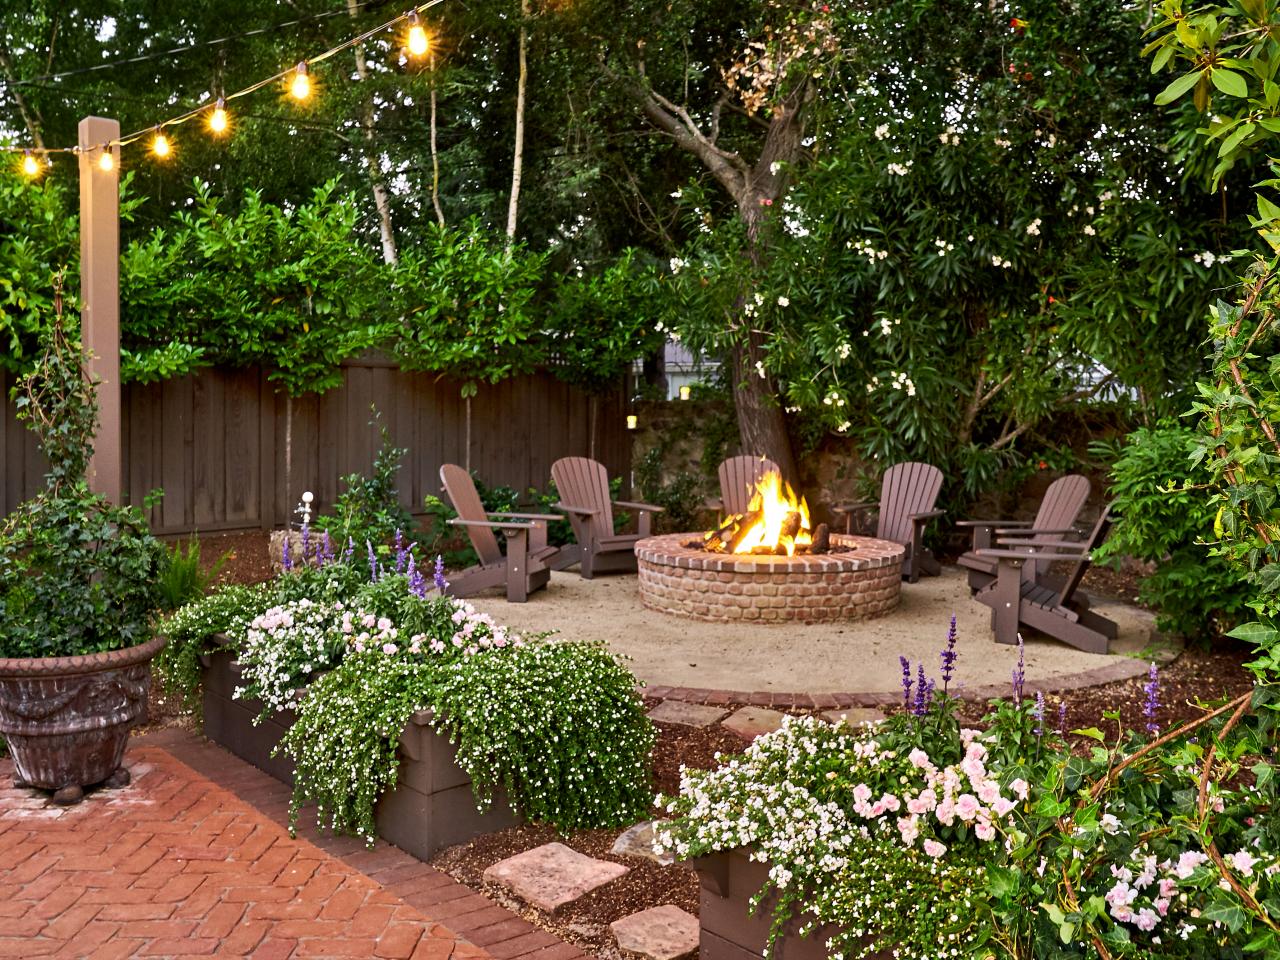 8 Stunning Backyard Design Ideas for Every Space